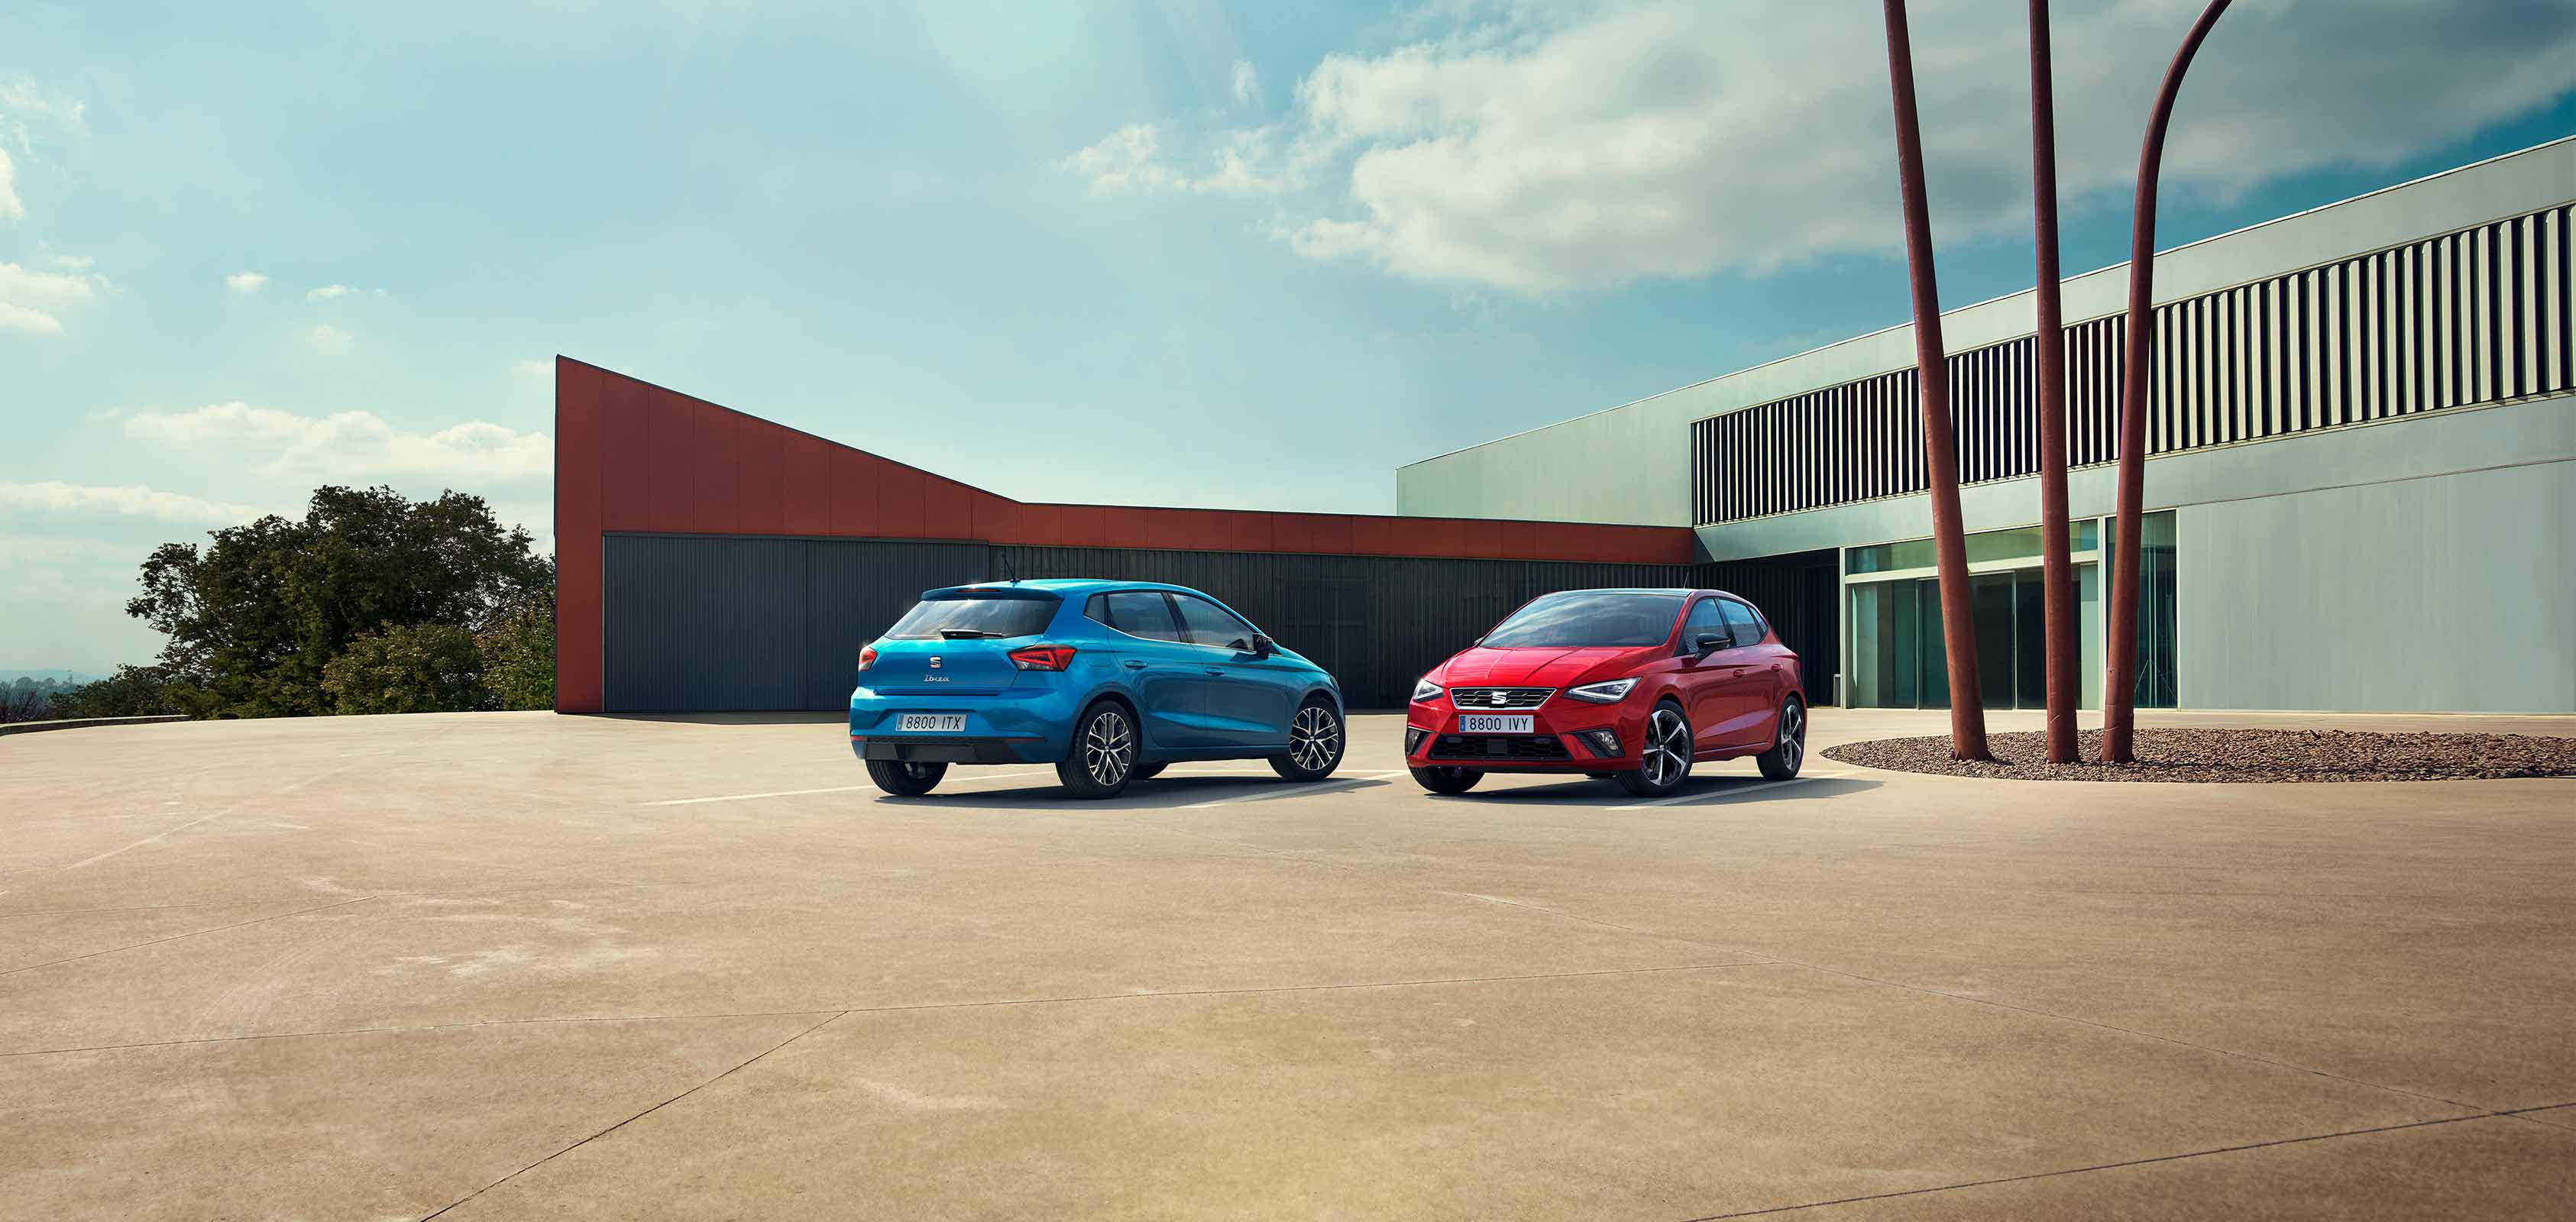 Two SEAT Ibiza parked, one Sapphire Blue colour and another Desire Red colour.